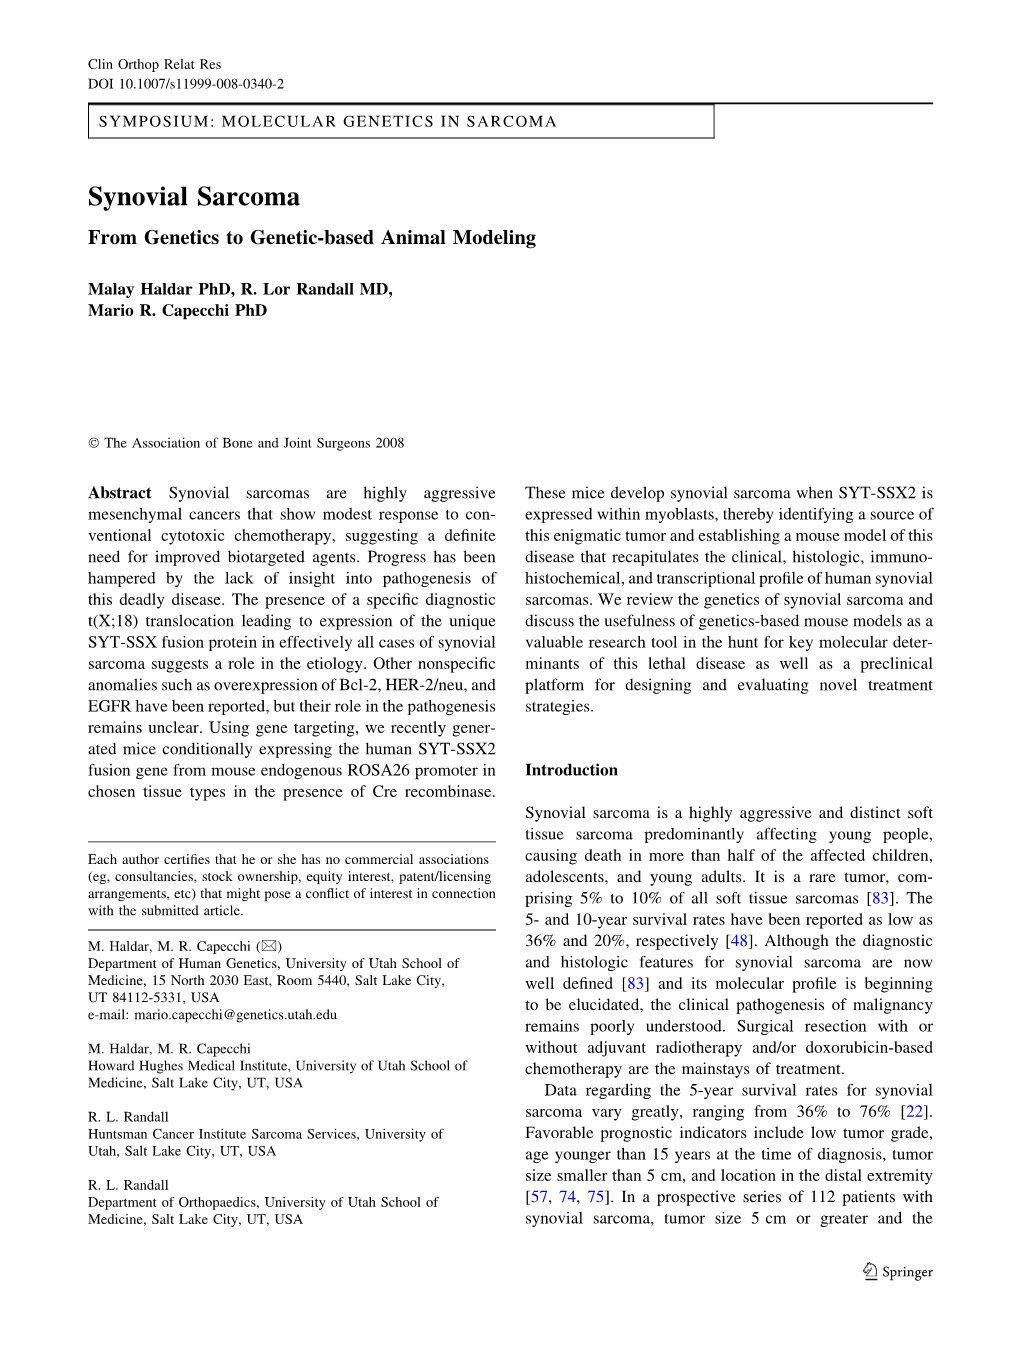 Synovial Sarcoma from Genetics to Genetic-Based Animal Modeling